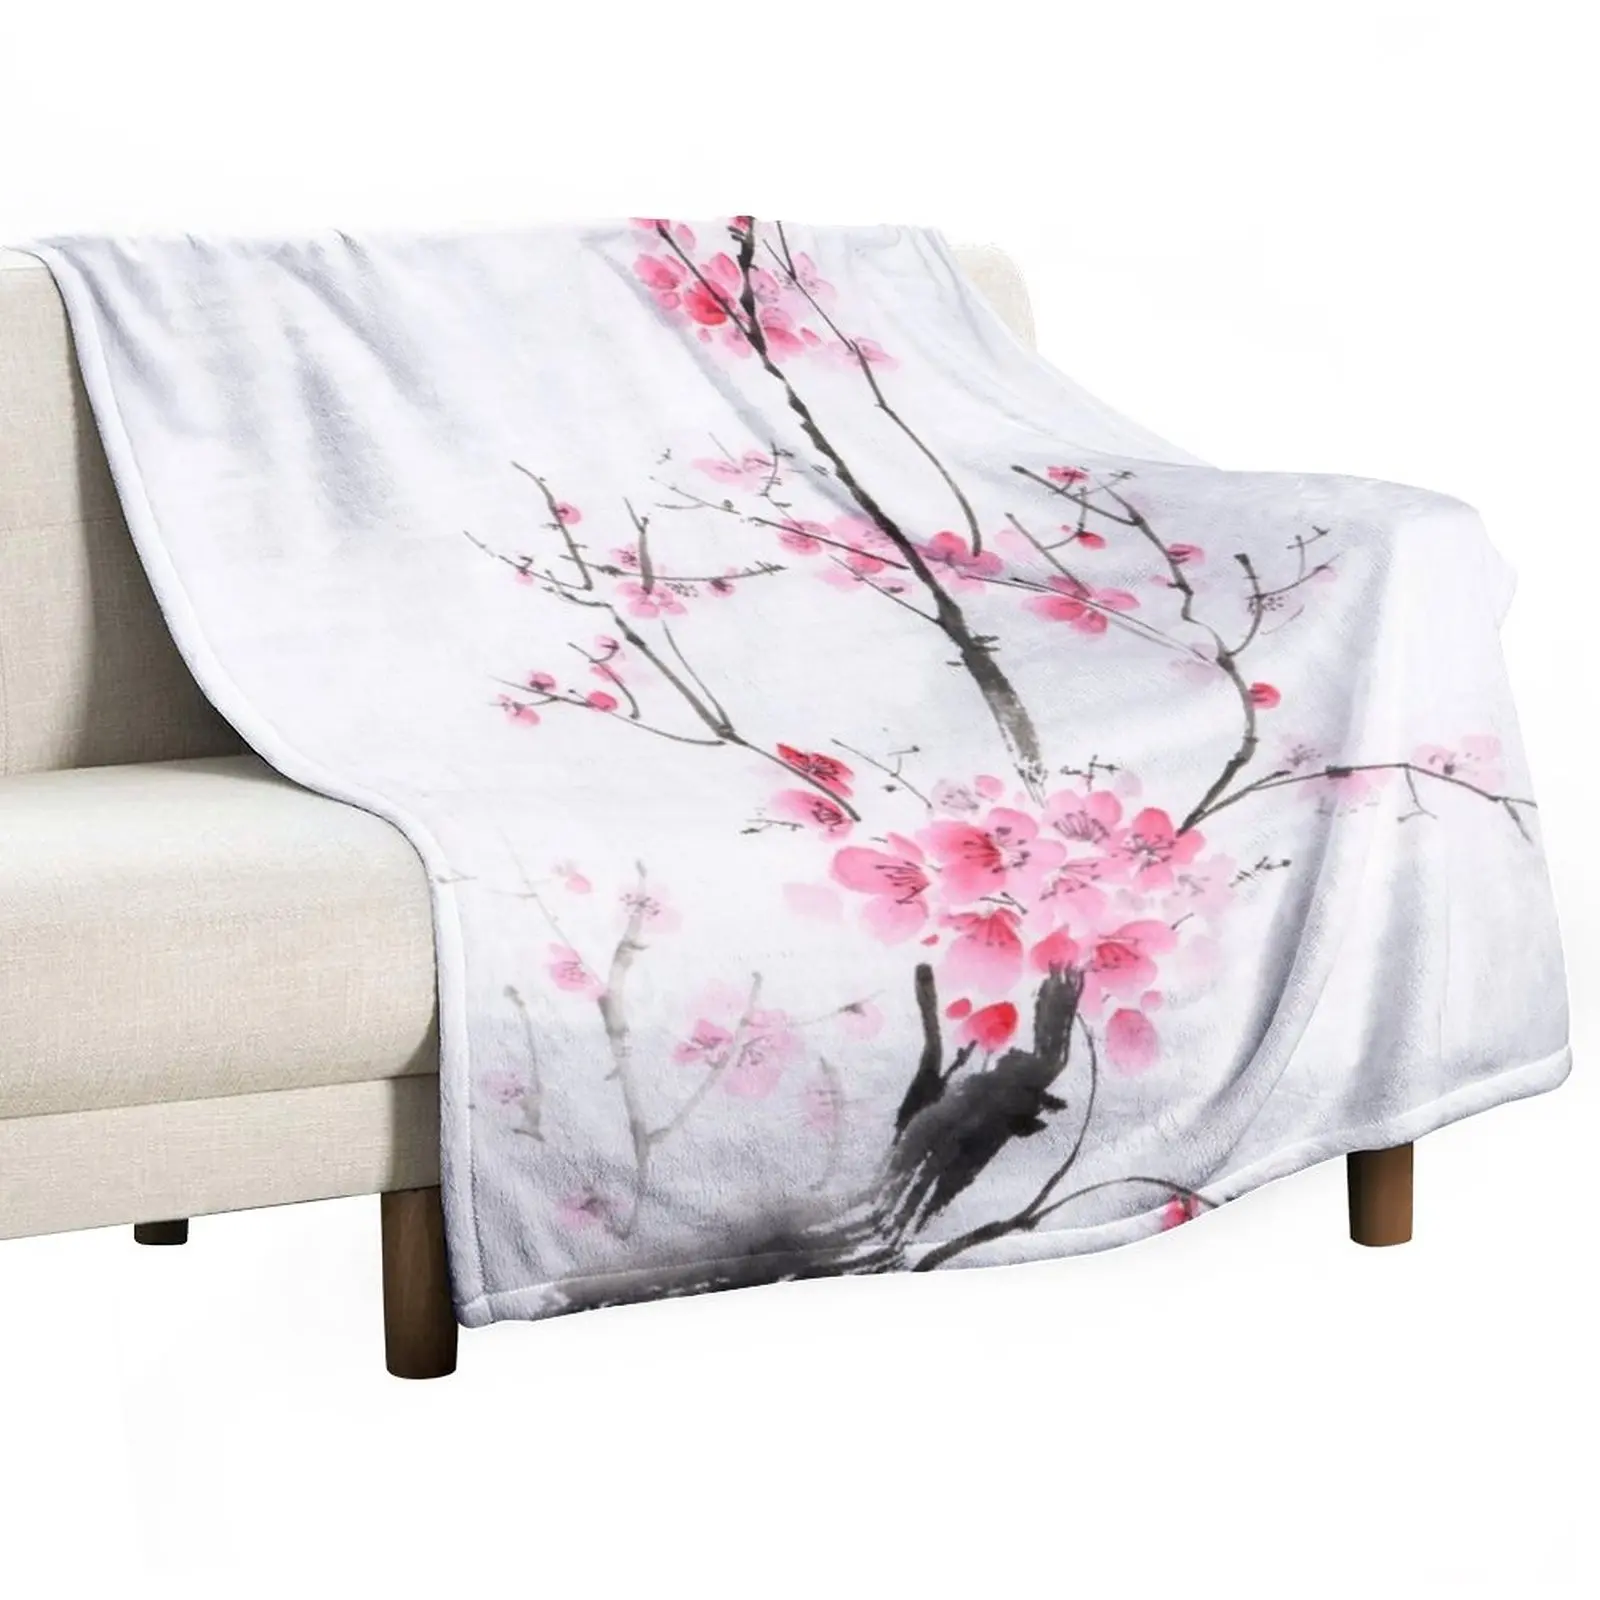 

Delicate sakura branch with pink blossoms Japanese Zen sumi-e painting on white rice paper art print Throw Blanket